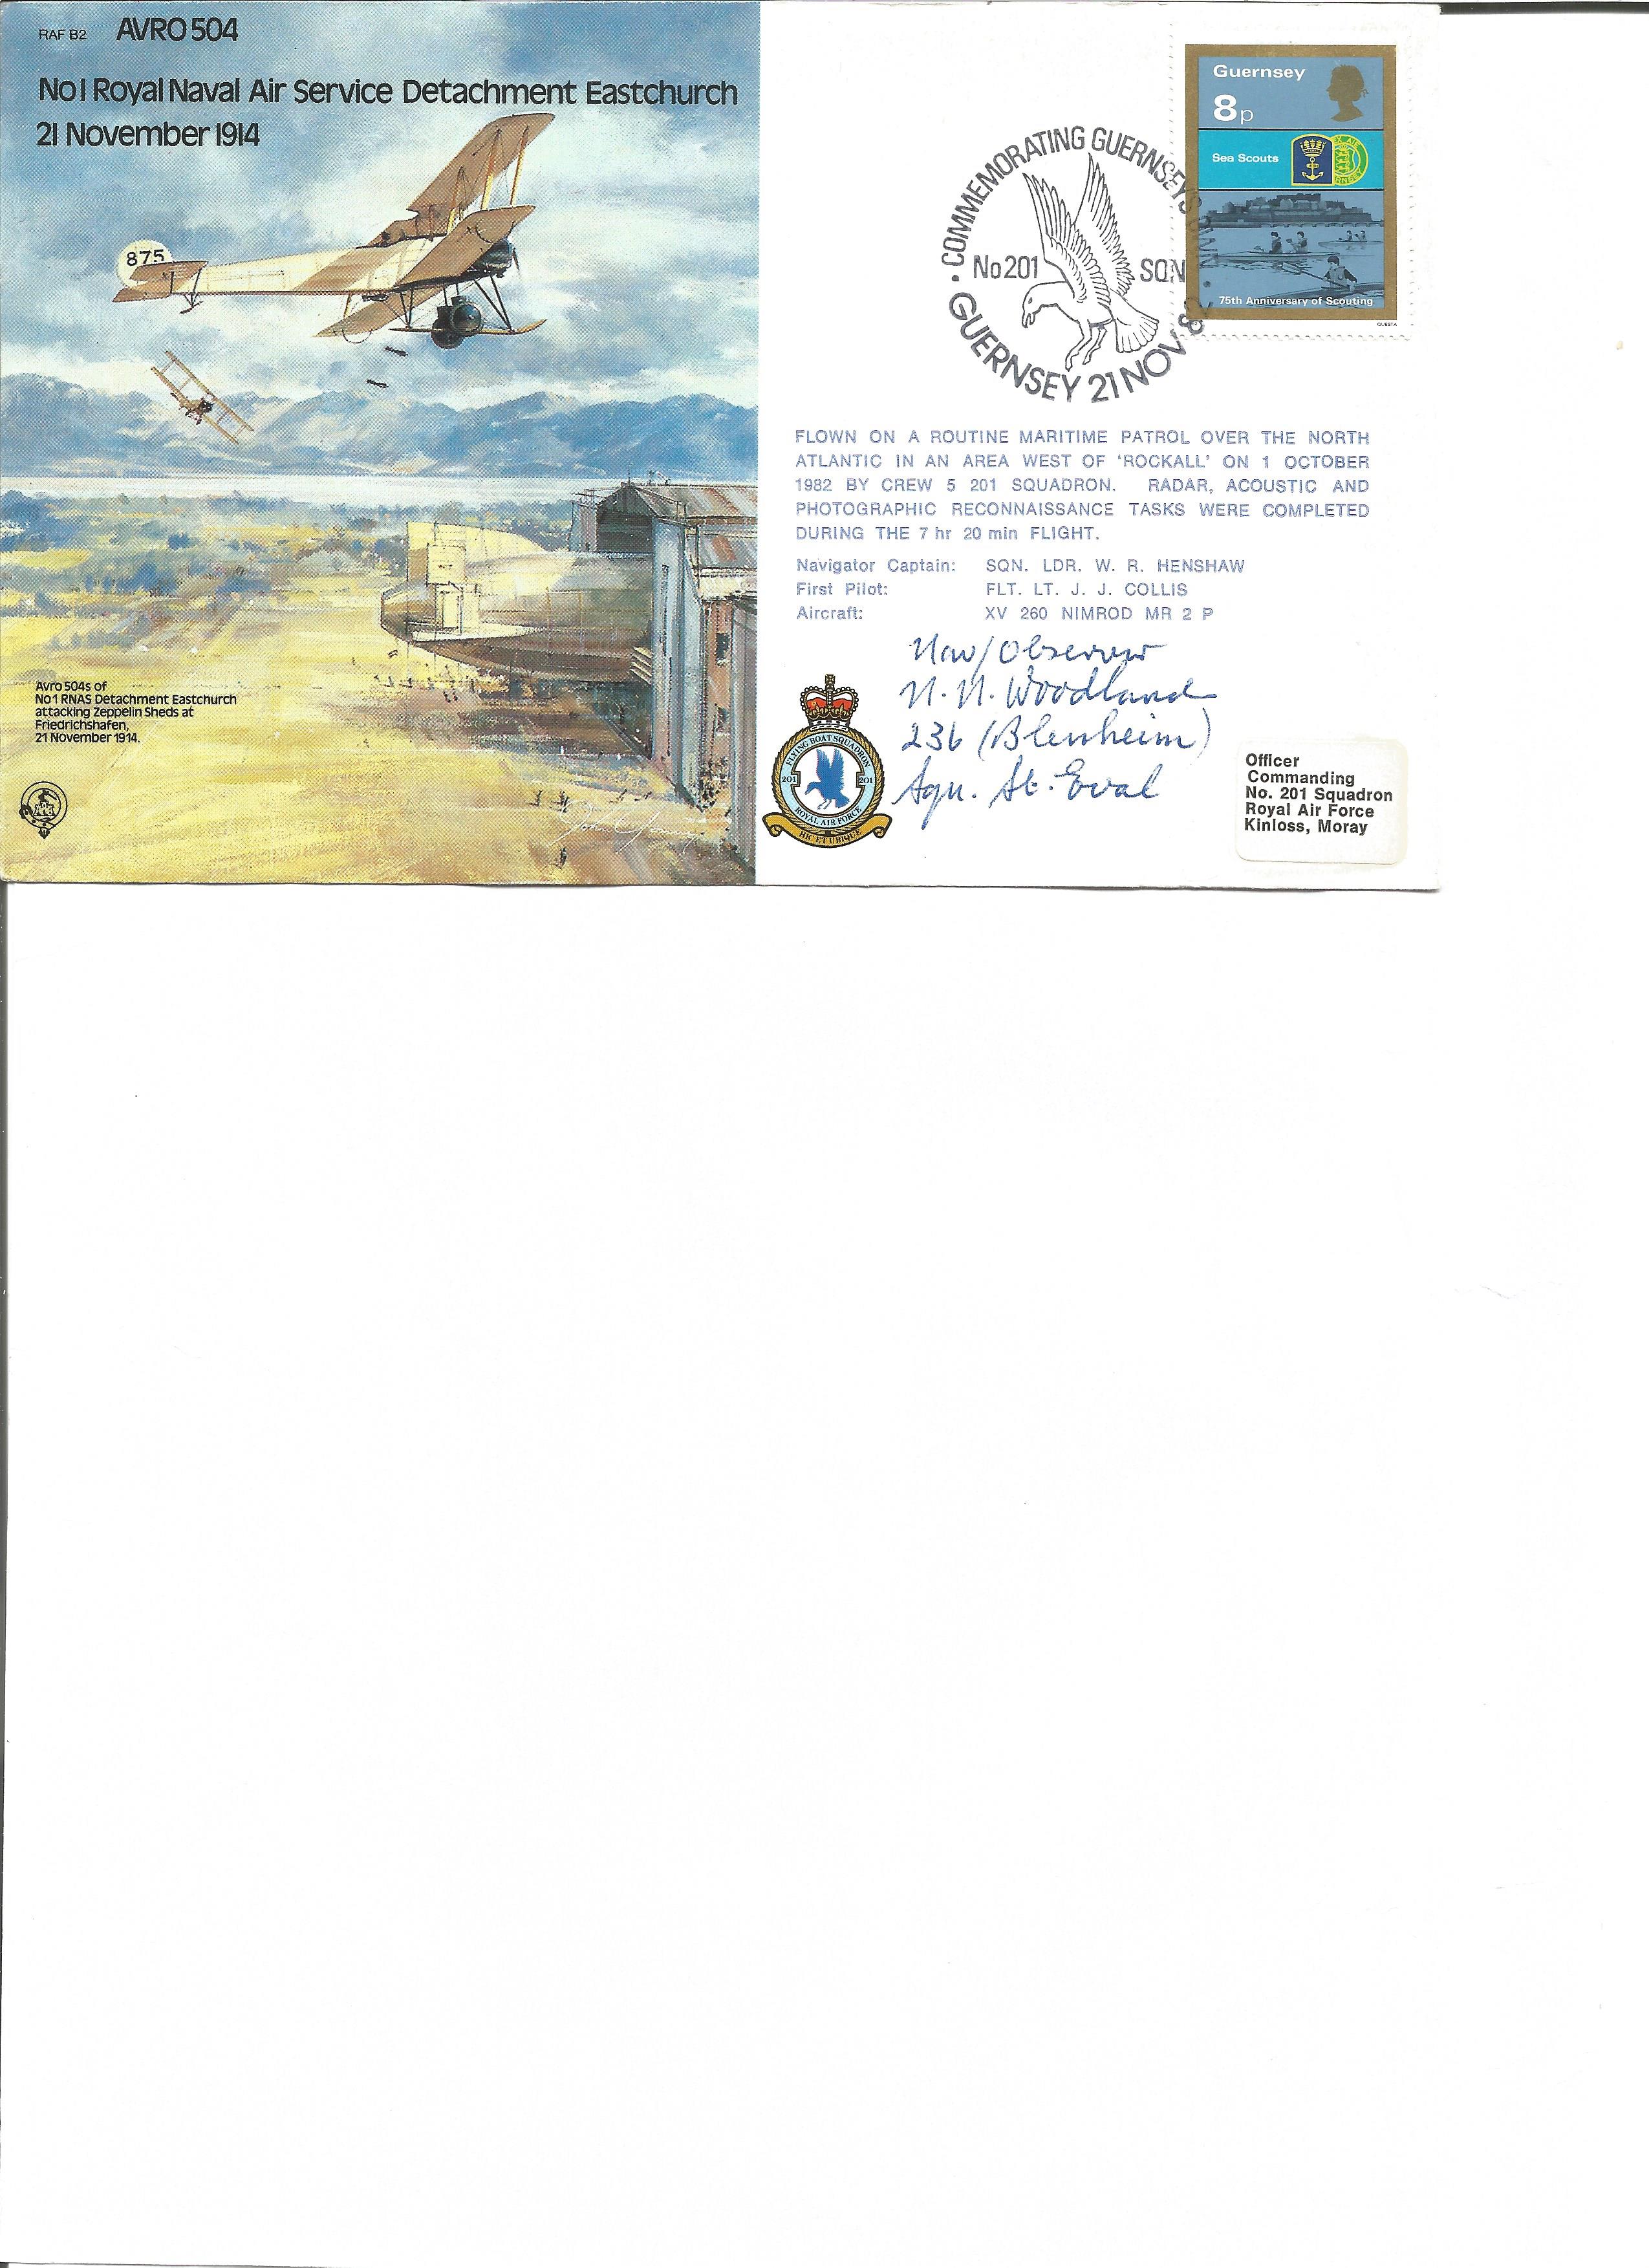 Norman Woodland signed Avro504 cover. Good Condition. All autographs are genuine hand signed and